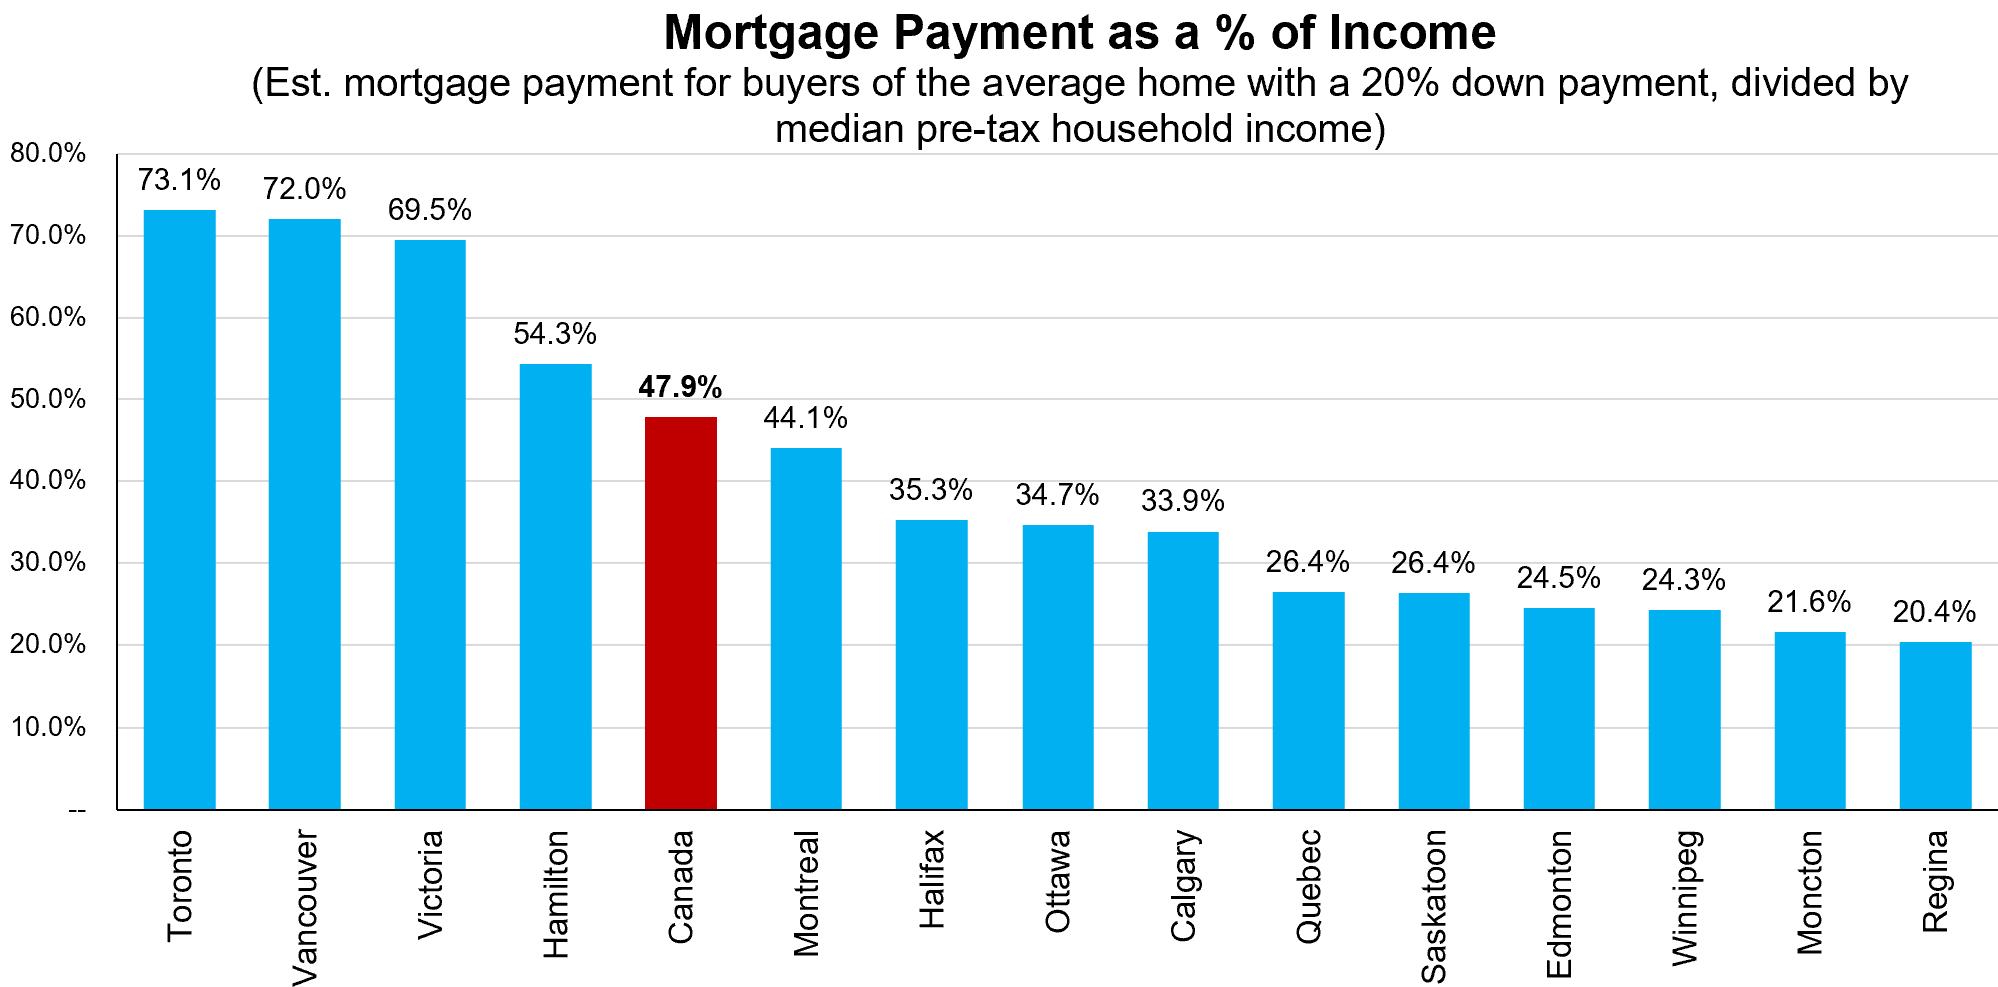 Canadian mortgage cost as a % of income